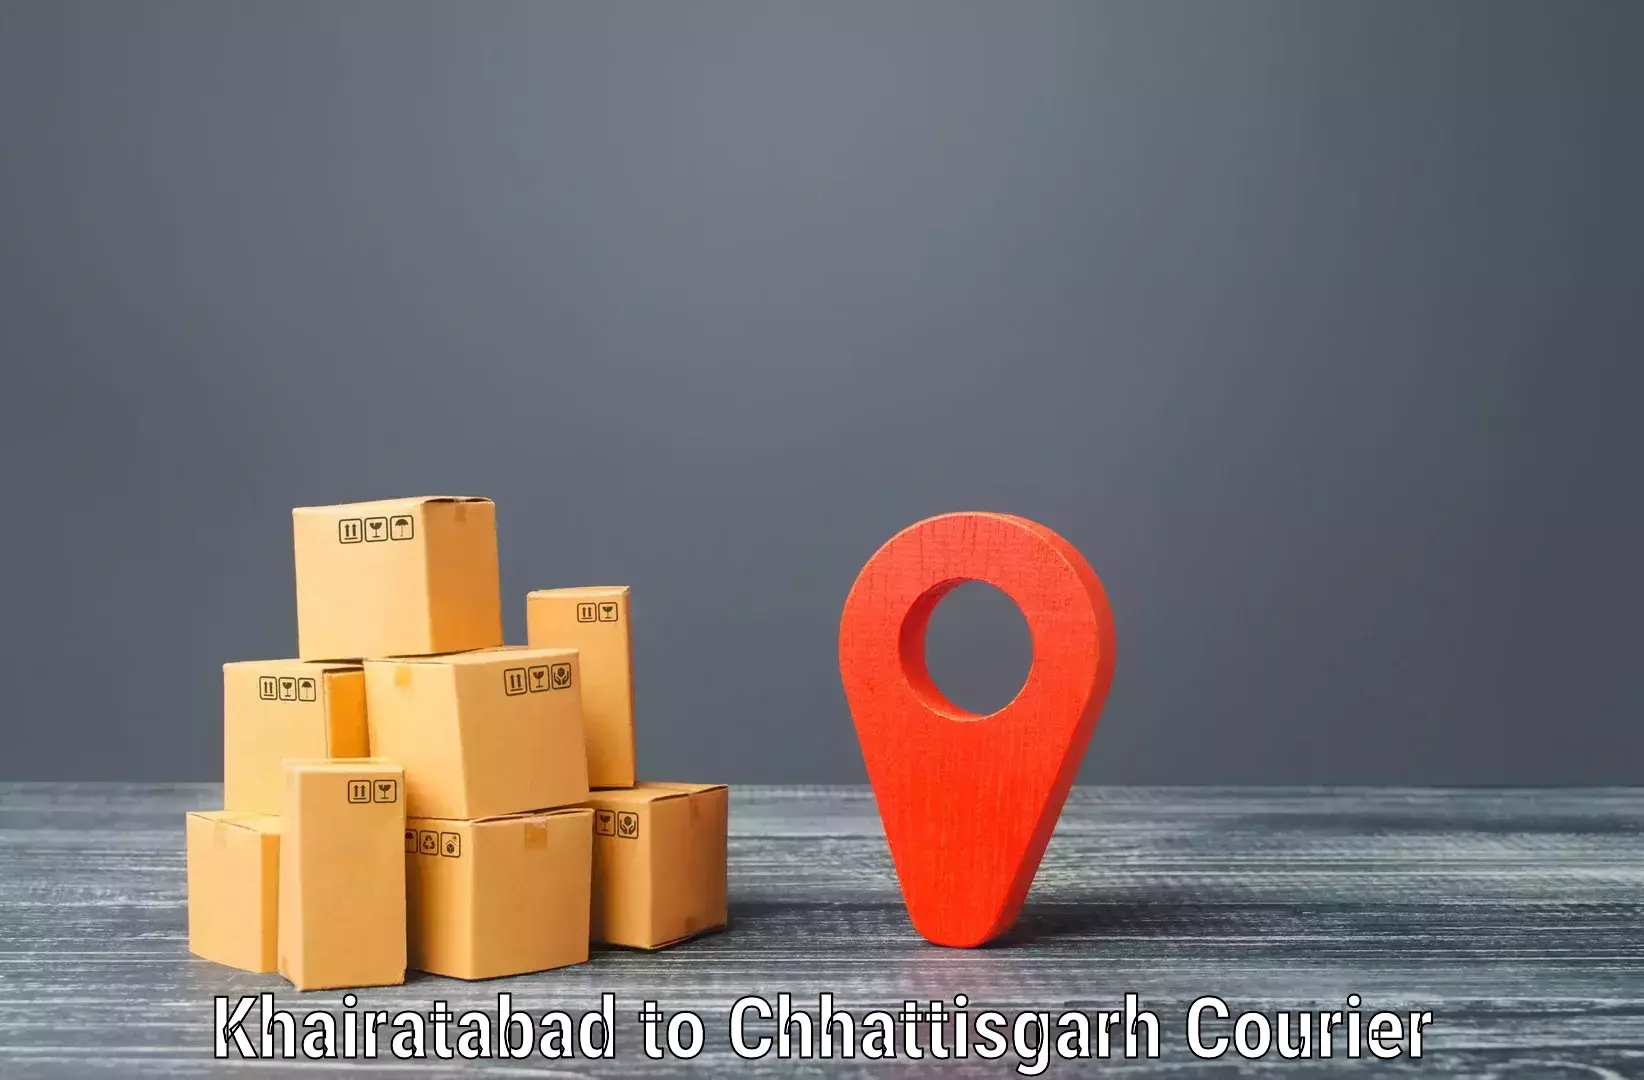 Seamless shipping experience Khairatabad to Bilaspur